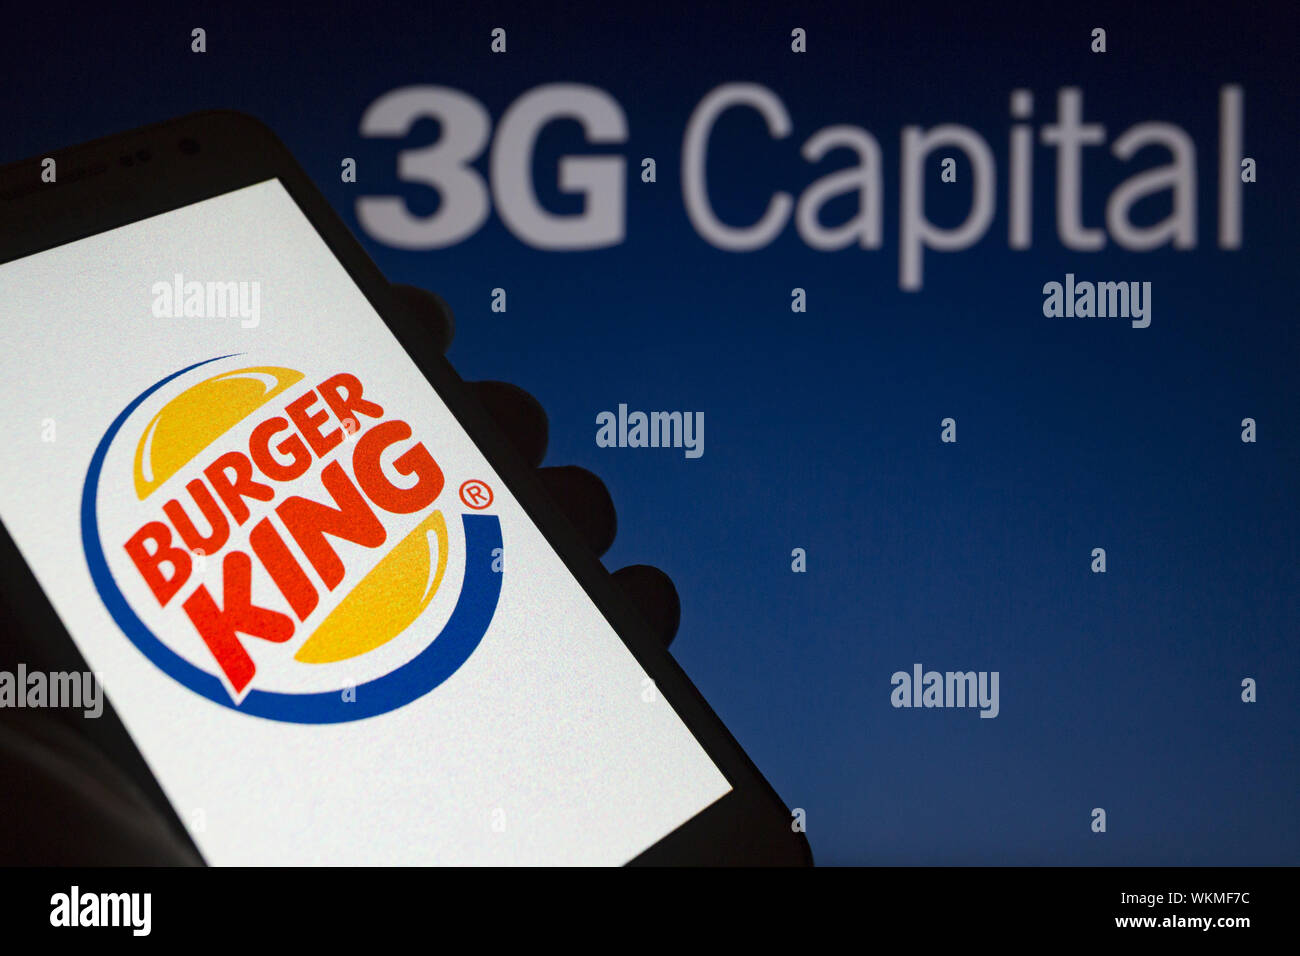 Asuncion, Paraguay. 4th Sep, 2019. Logo of Burger King, an American global chain of hamburger fast food restaurants is seen on a smartphone screen against the 3G Capital logo, a Brazilian-American global investment firm, unfocused on background. Credit: Andre M. Chang/ZUMA Wire/Alamy Live News Stock Photo